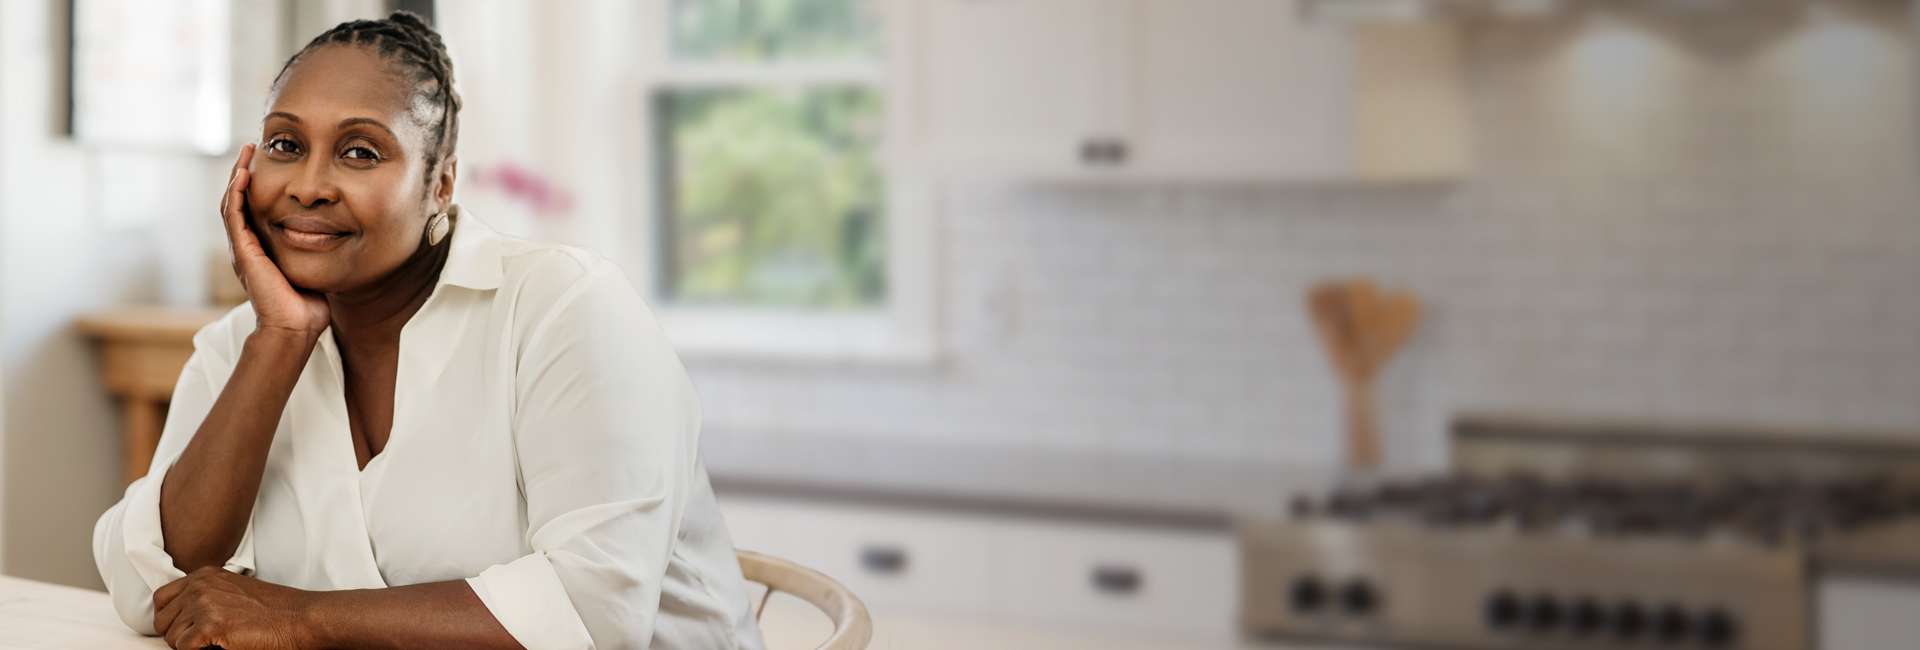 African American woman wearing a white button up shirt sitting at the kitchen table.